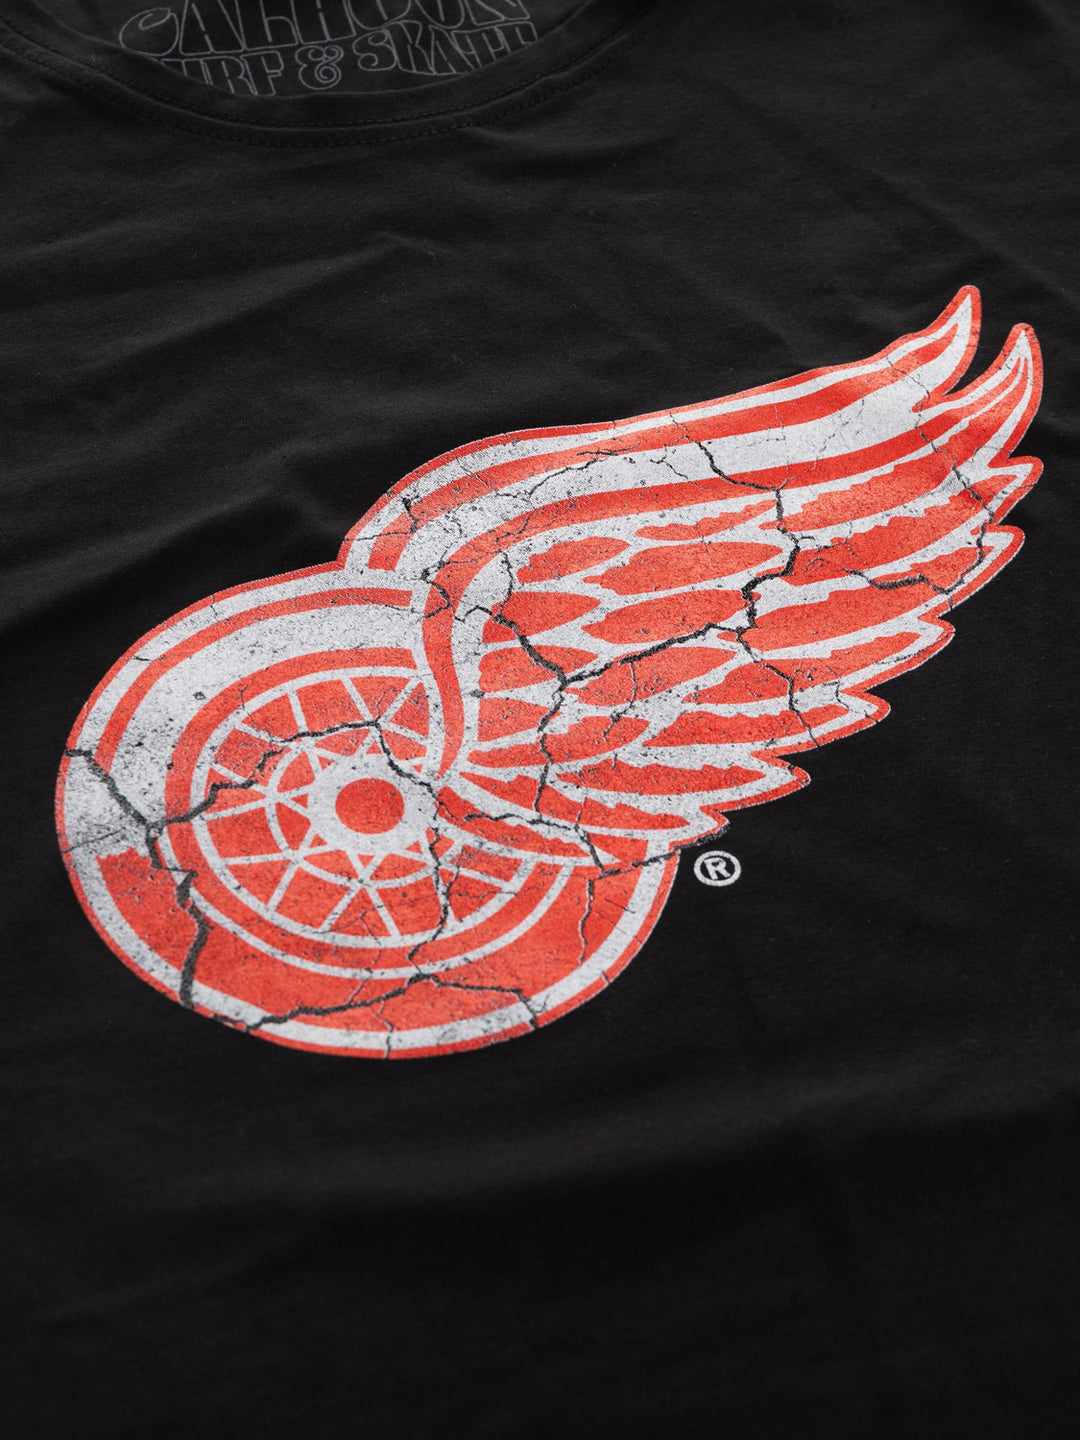 Detroit Red Wings Women's Distressed Print Fitted Crew Neck Premium T-Shirt - Black